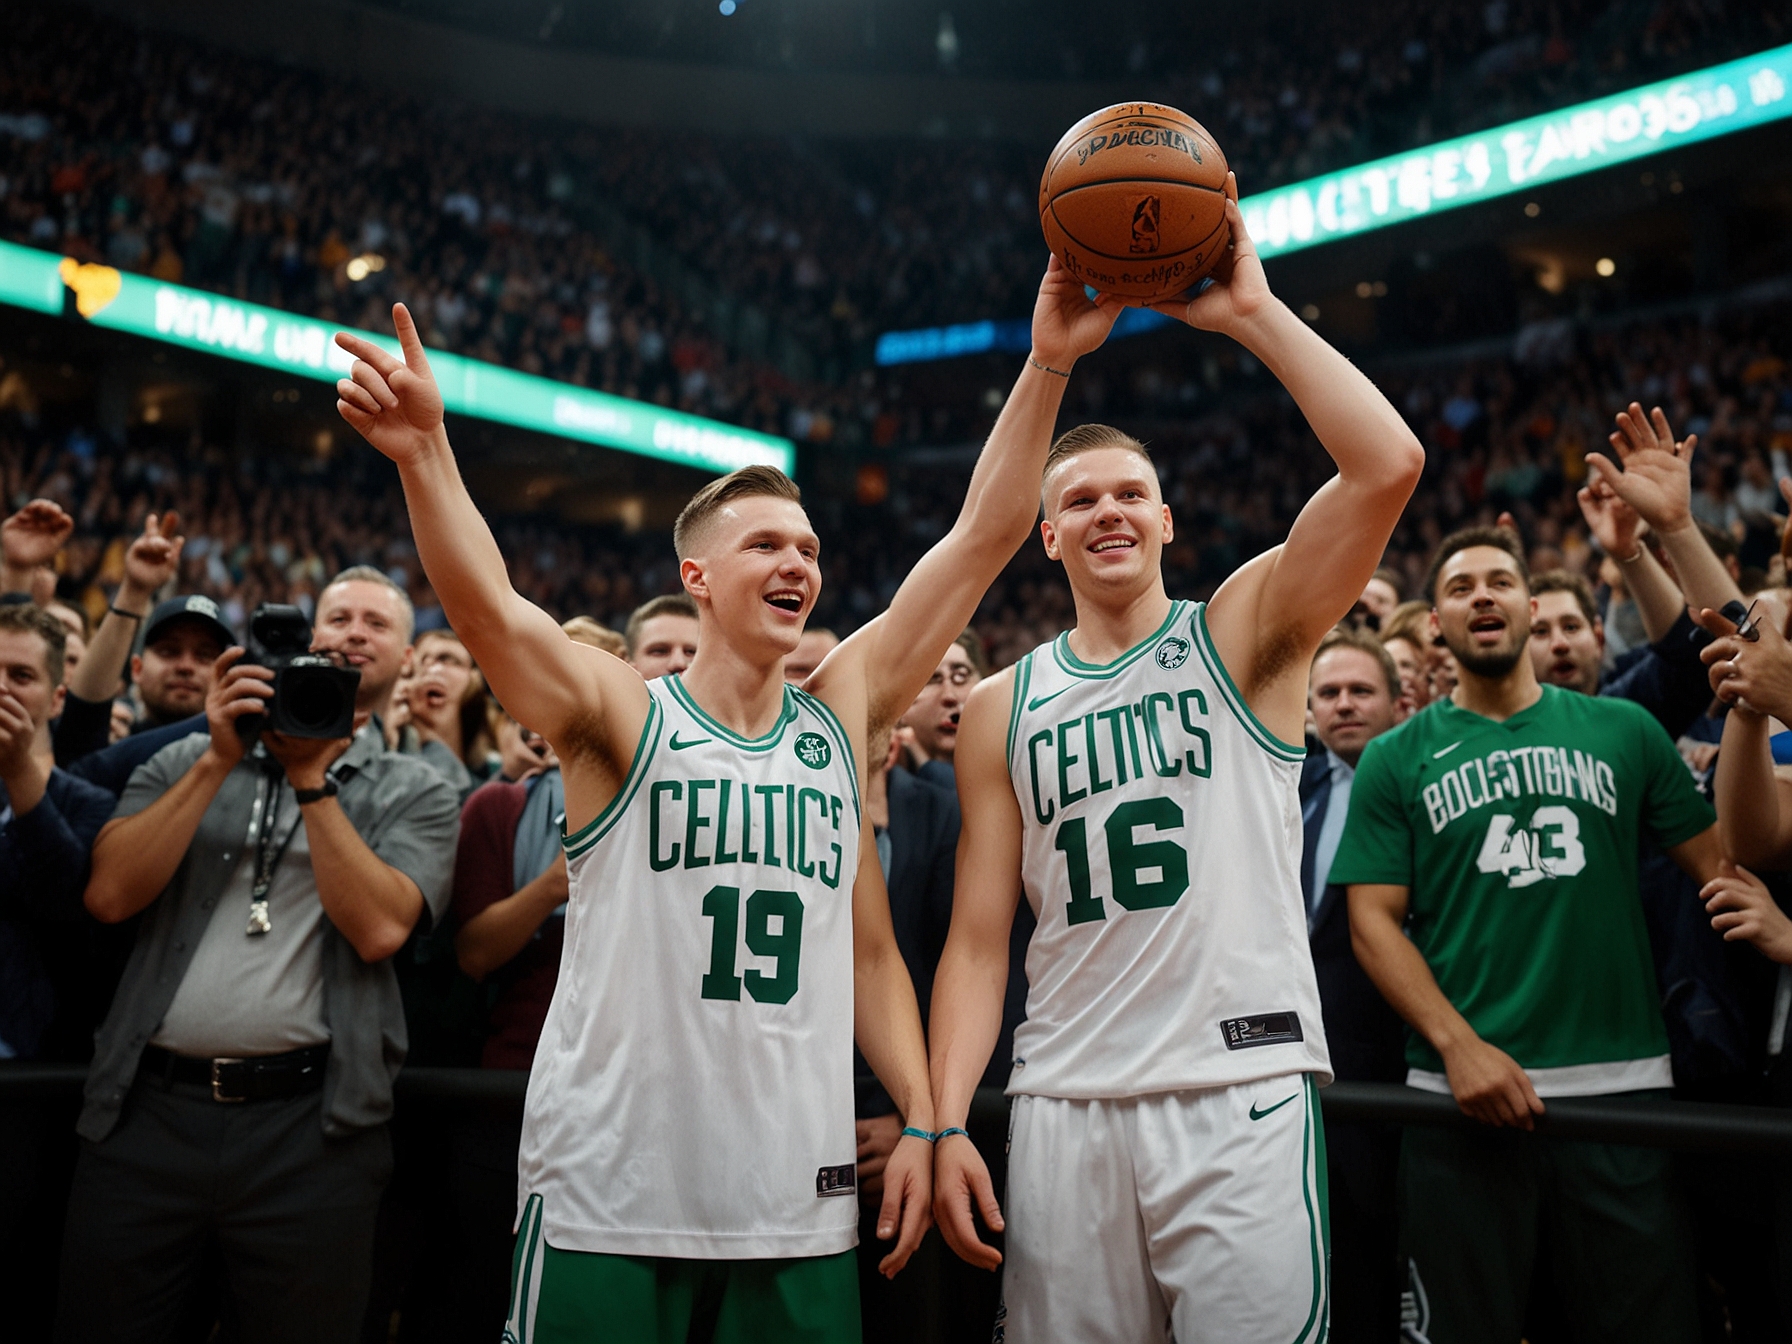 Fans at TD Garden in Boston celebrate as Kristaps Porzingis steps onto the court, energizing the Celtics with key plays and altering the momentum in the high-stakes NBA Finals.